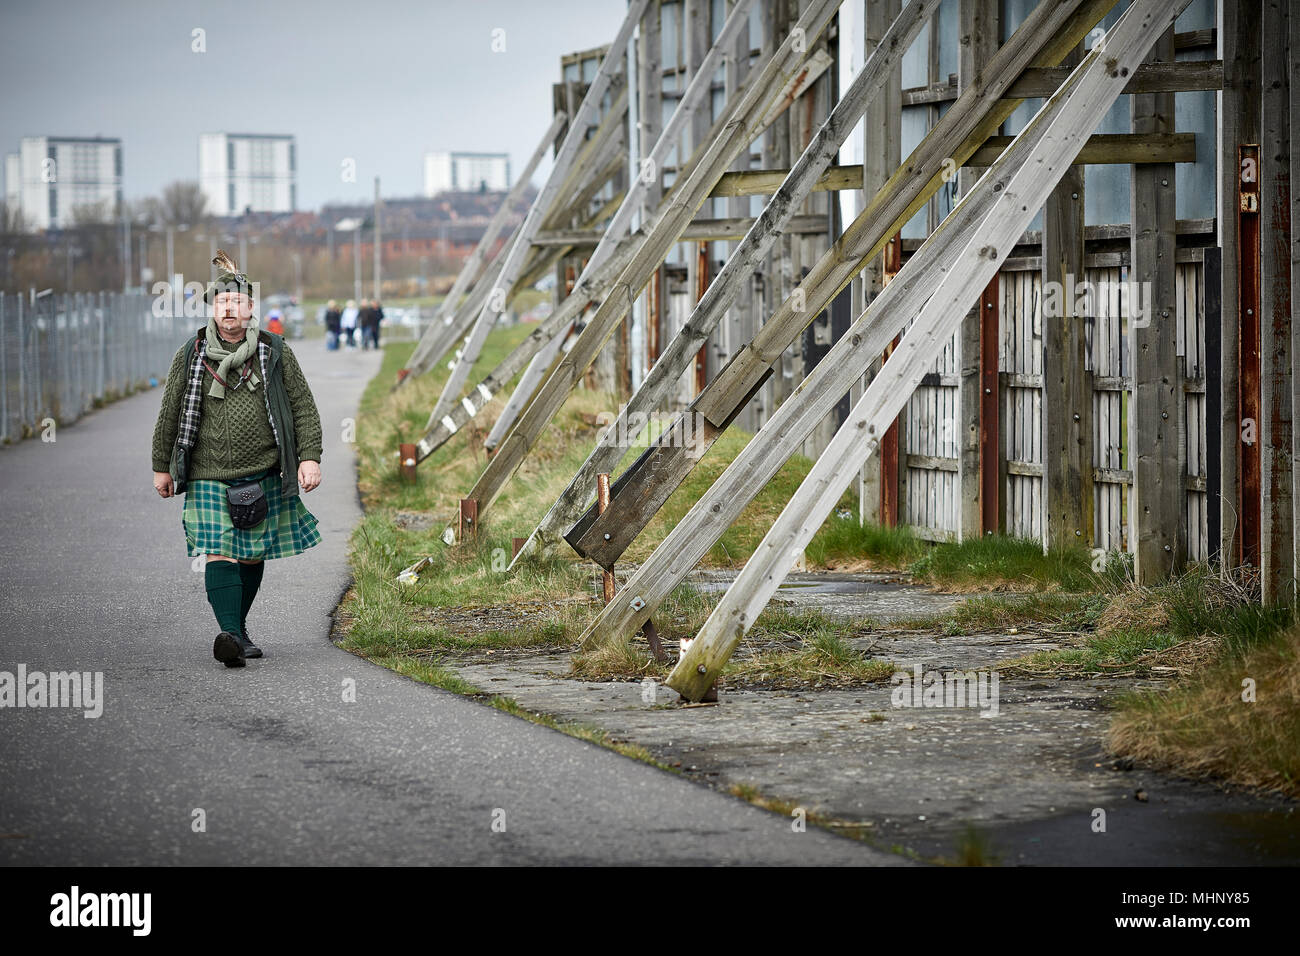 Glasgow in Scotland,  Kilt wearing gent walking alone the River Clyde Stock Photo